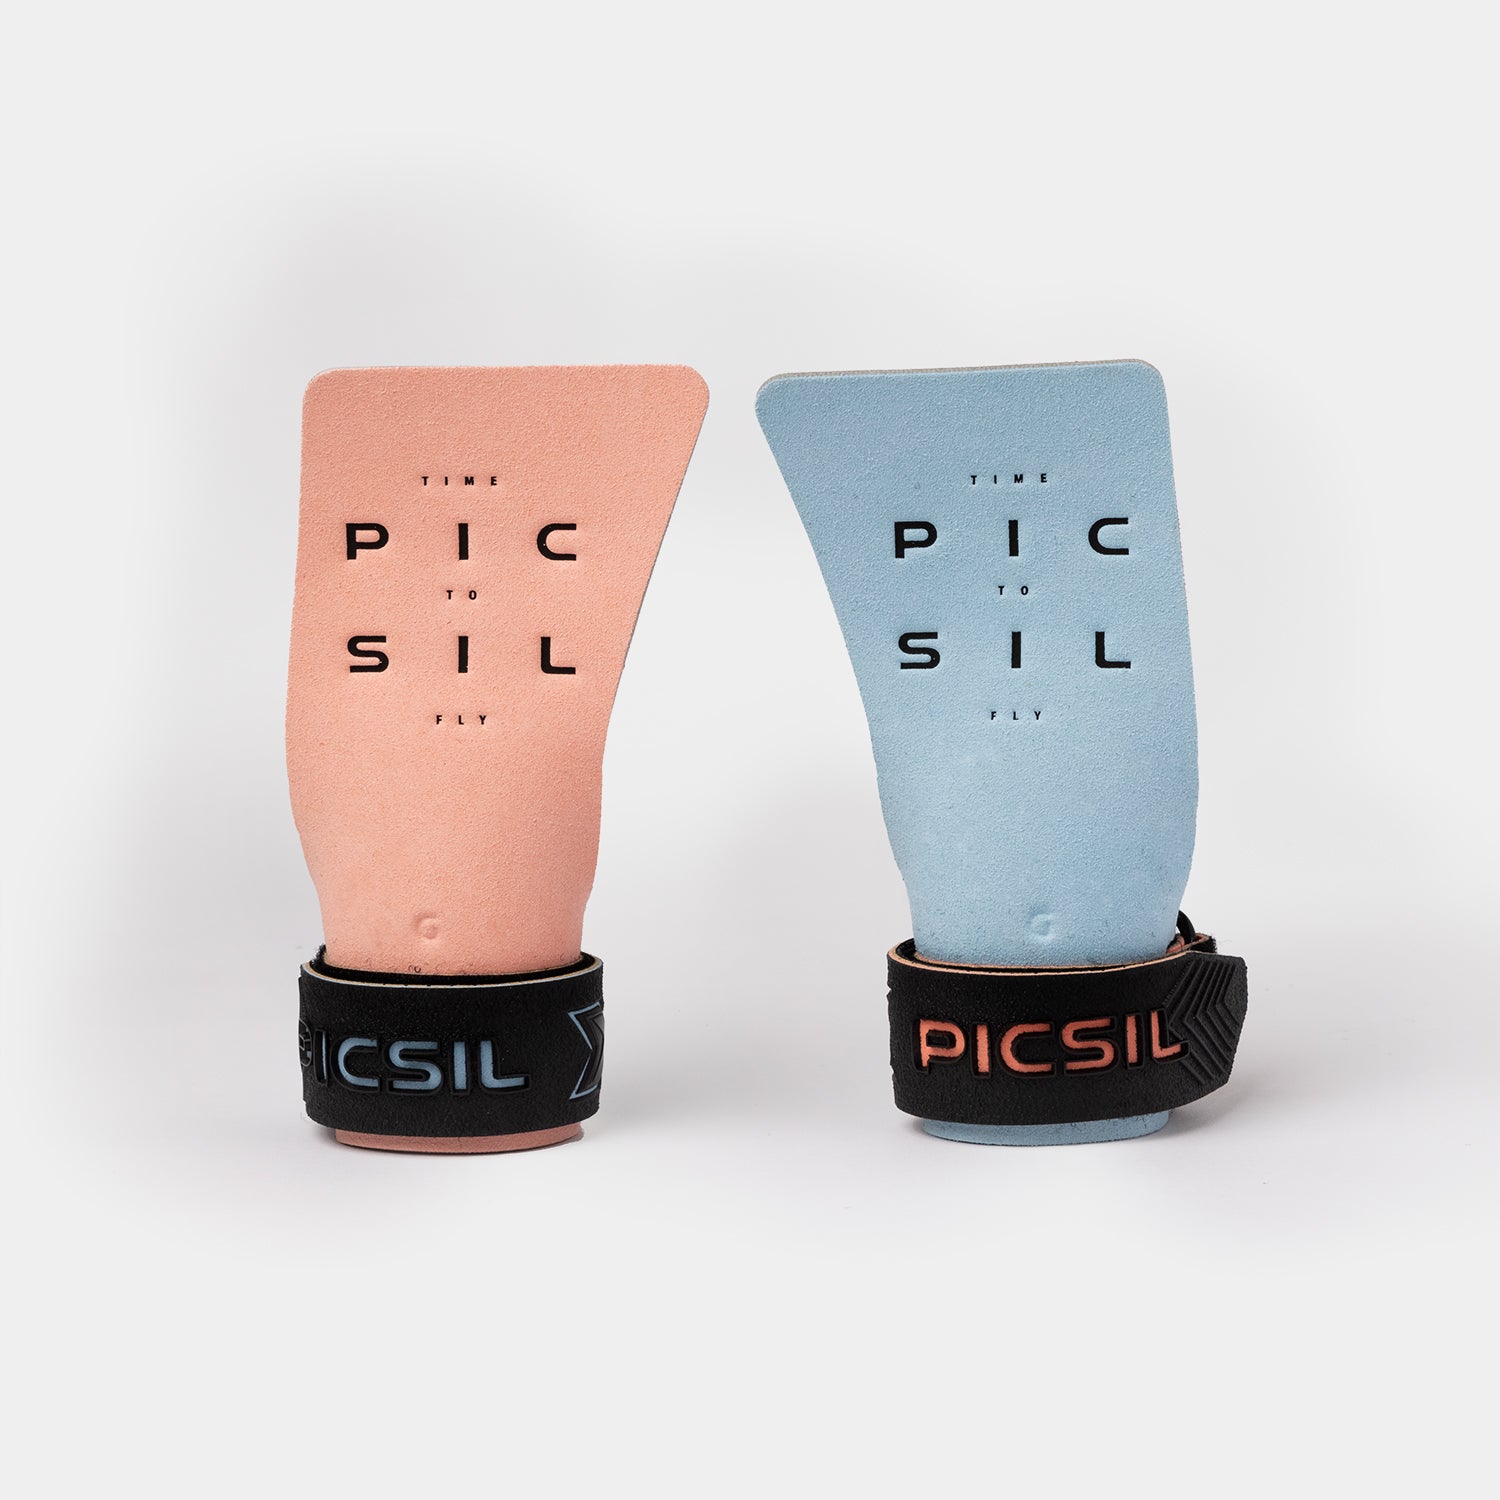 Coral Blue Condor No Hole Grips from Picsil for Genejack WOD